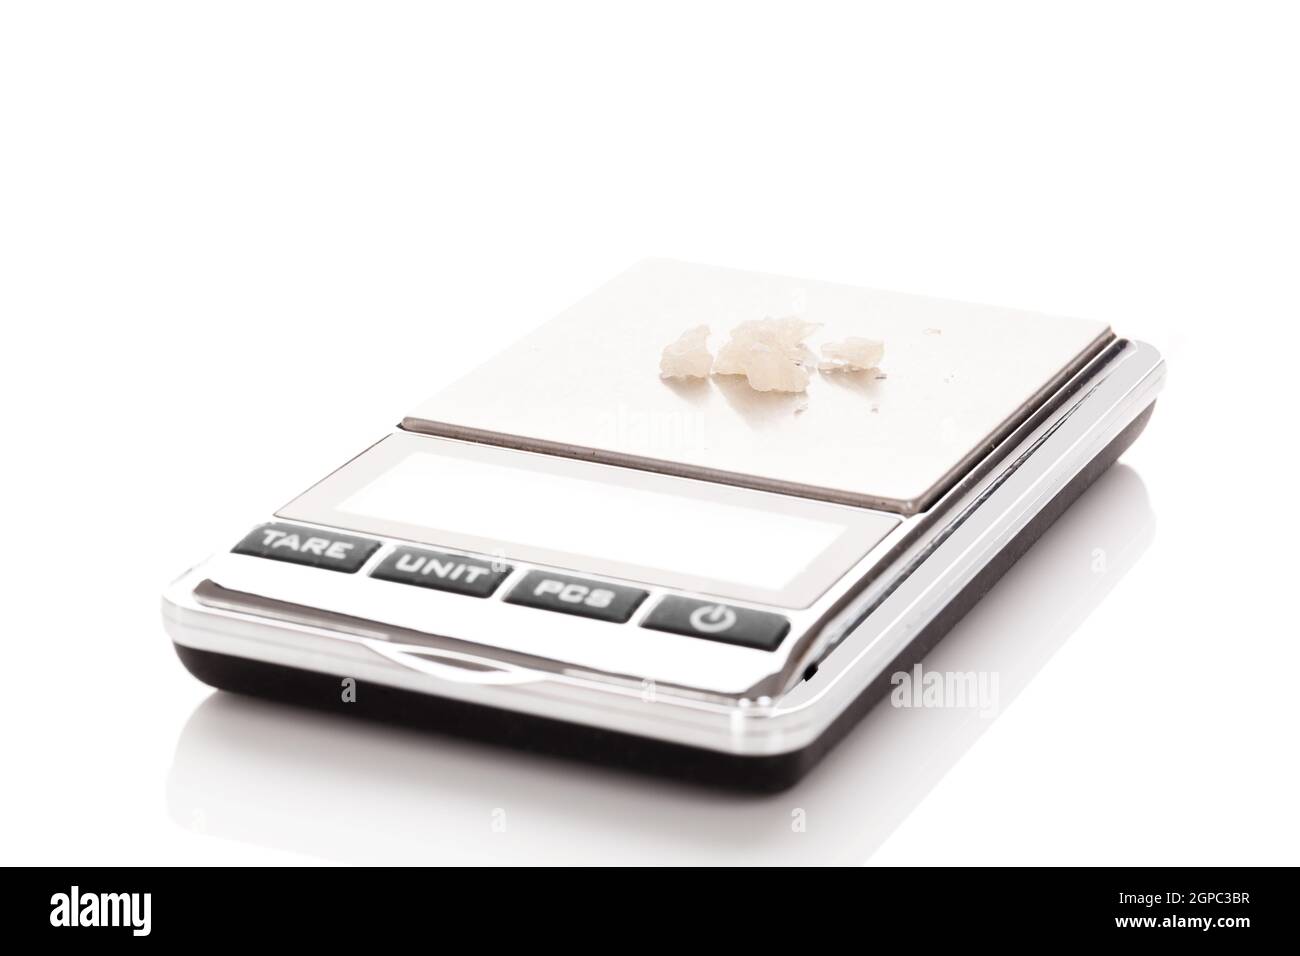 Pills of MDMA synthetic drugs on small digital scale Stock Photo